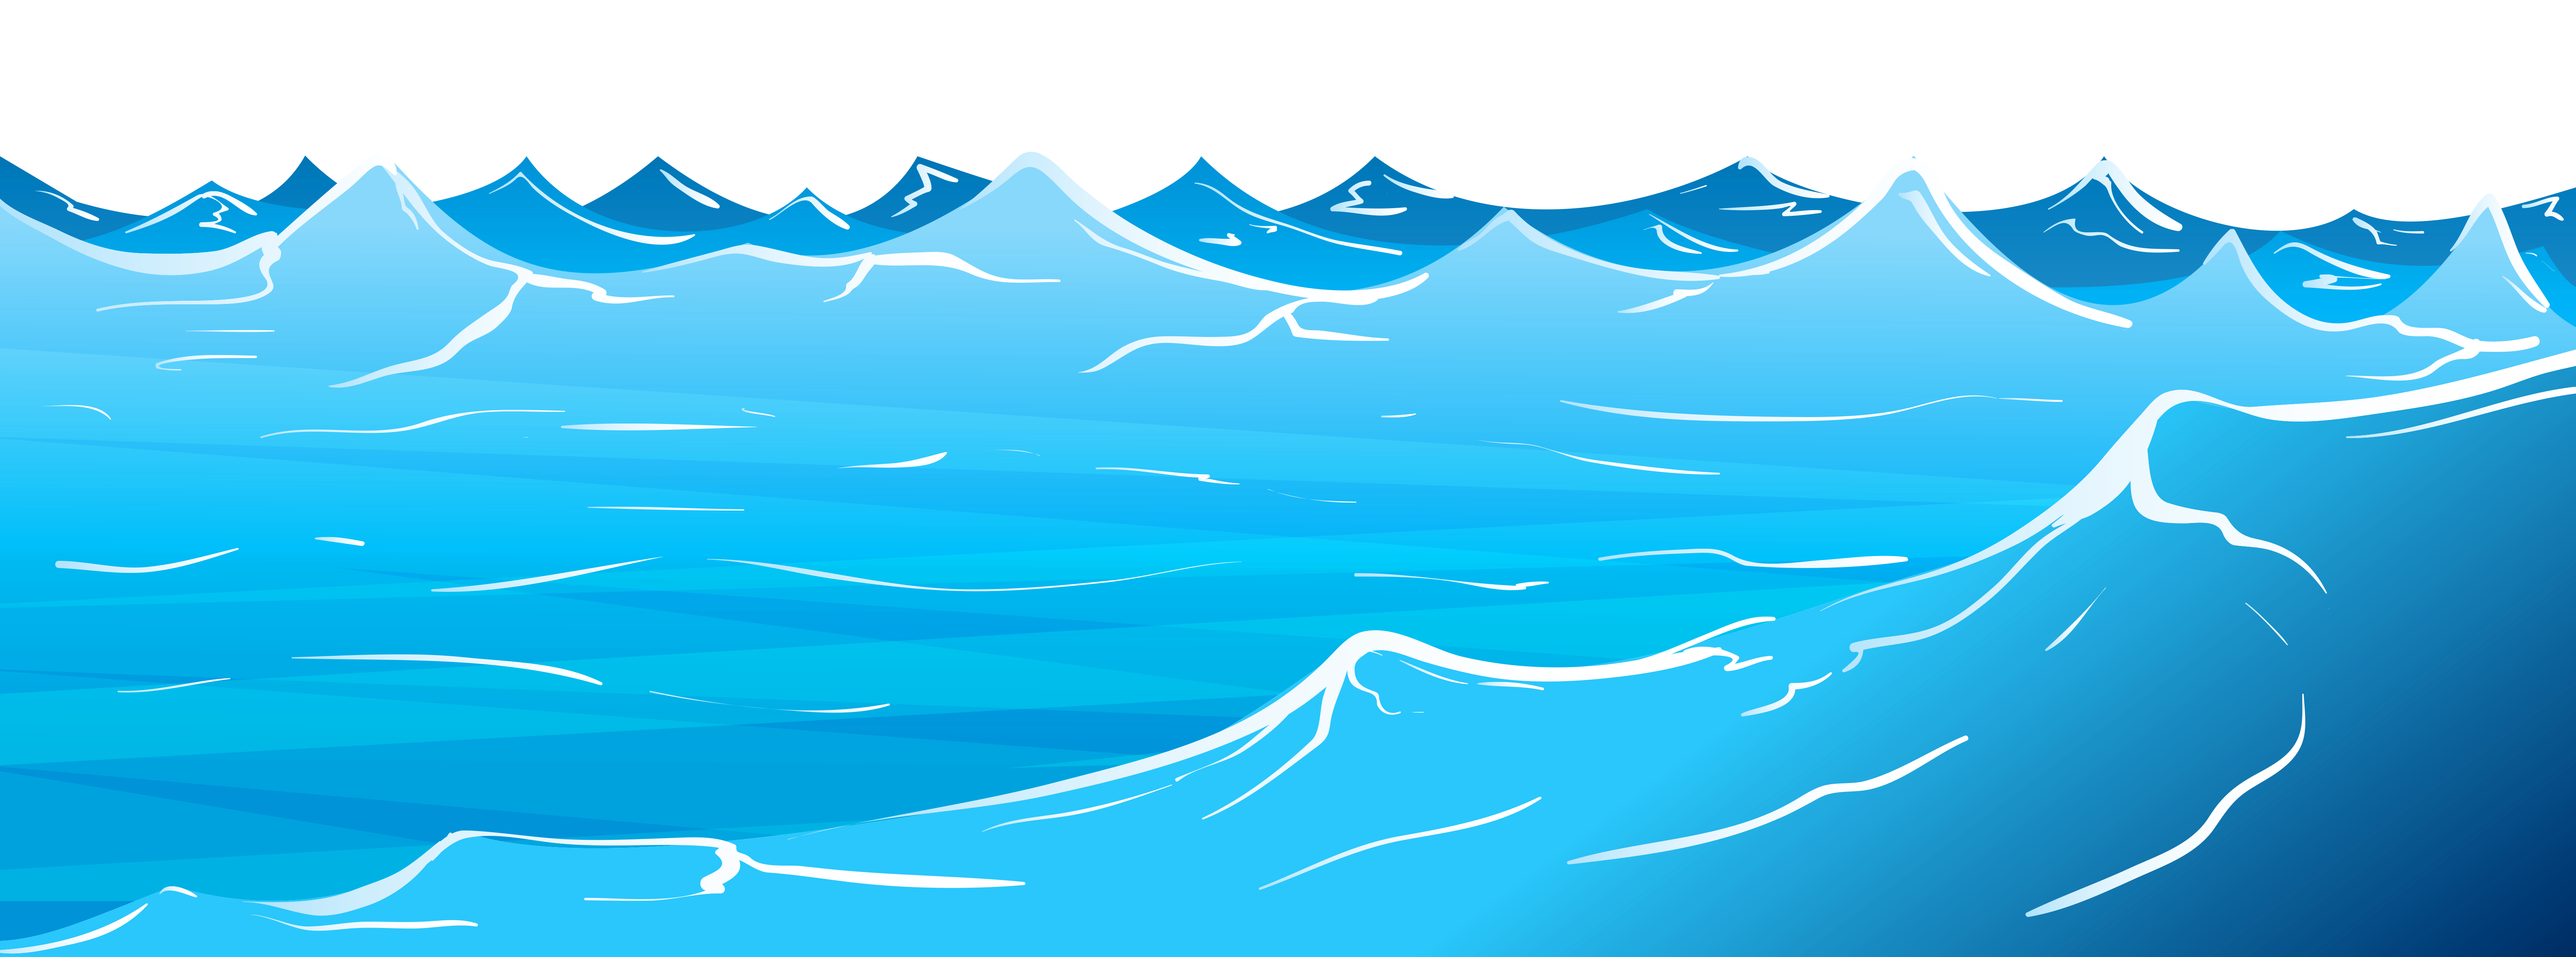 Free Water Background Cliparts, Download Free Clip Art, Free.